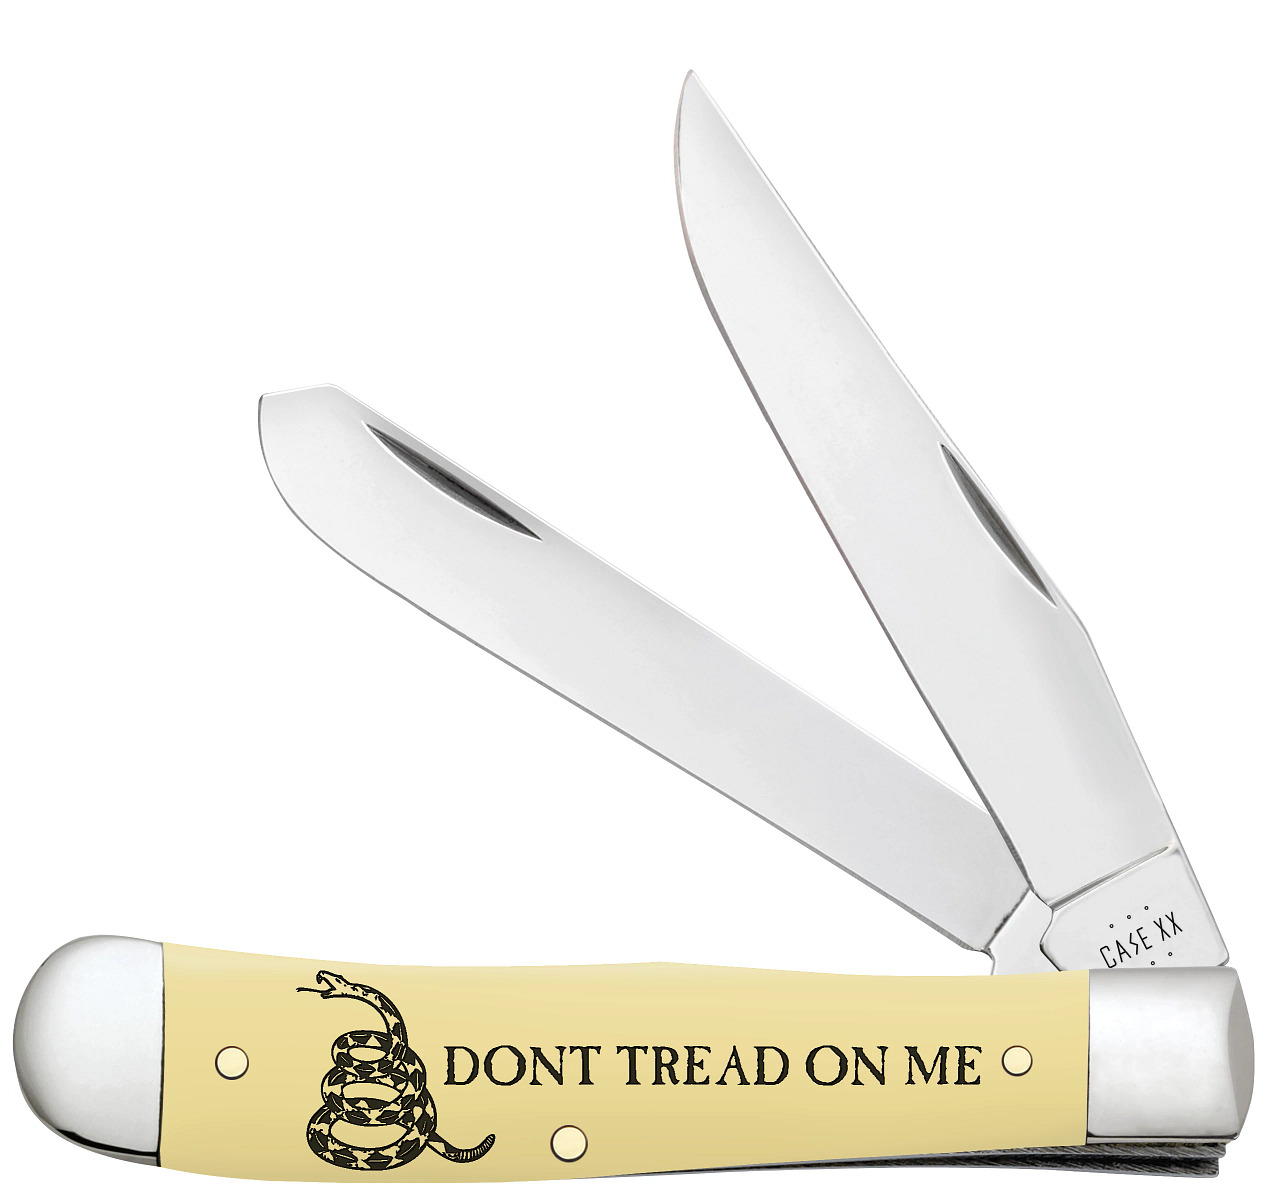 Case XX Knives \'DTOM\' Trapper 6089 Yellow Delrin Stainless Steel Pocket Knife